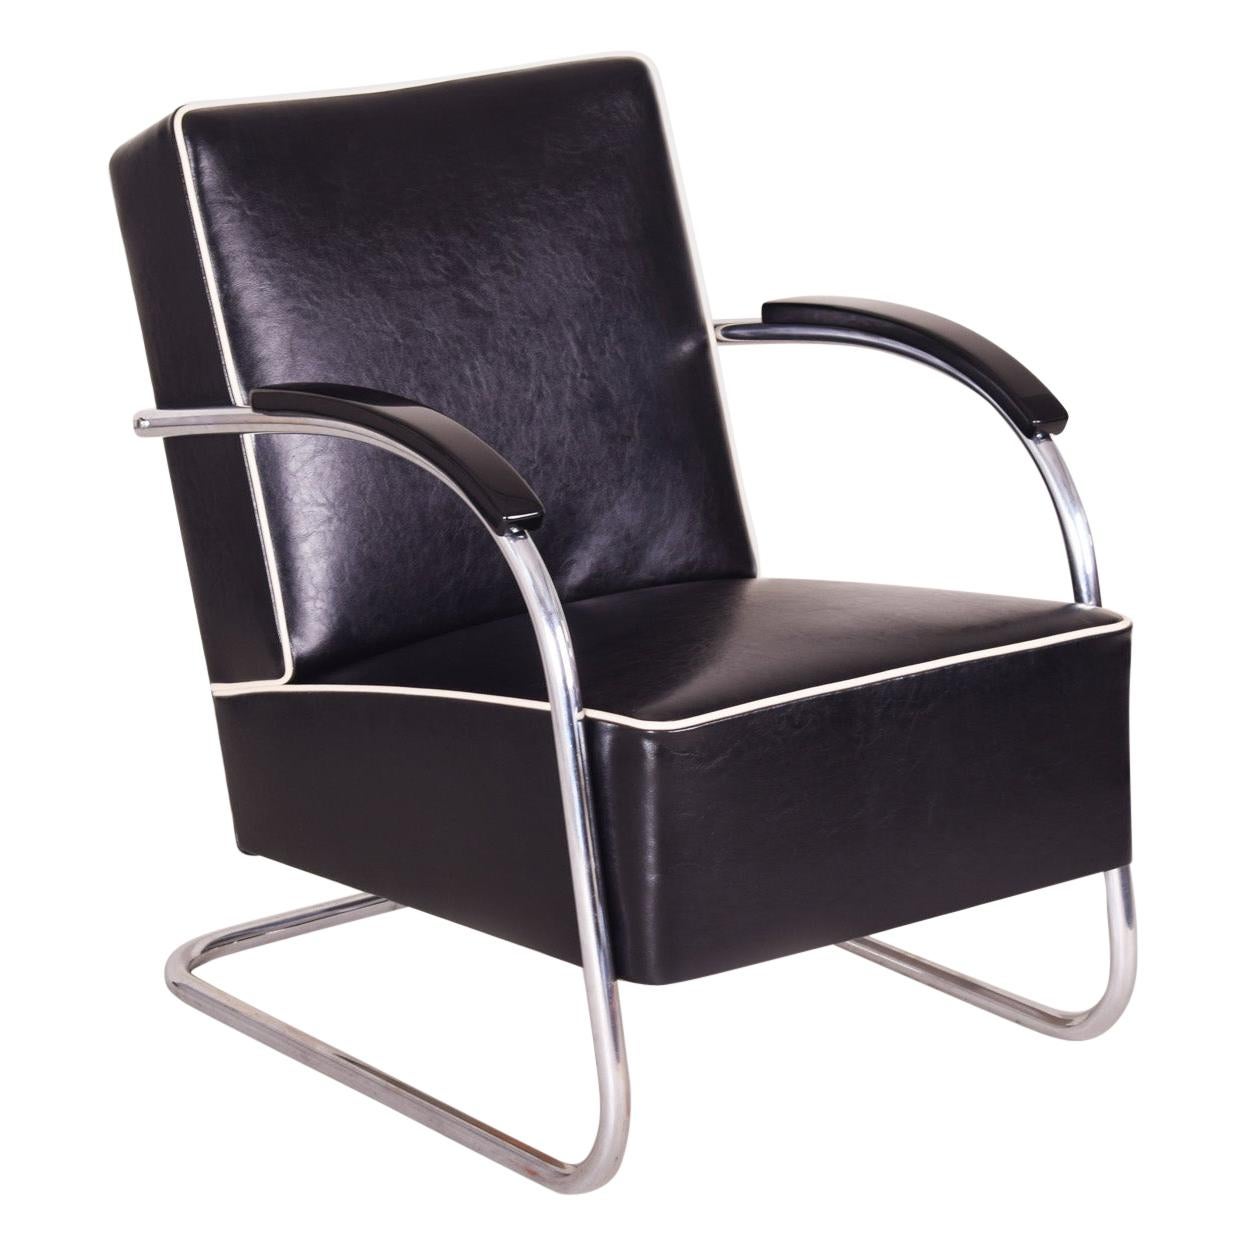 Black Tubular Steel Cantilever Armchairs, Chrome, New Leather and Upholstery